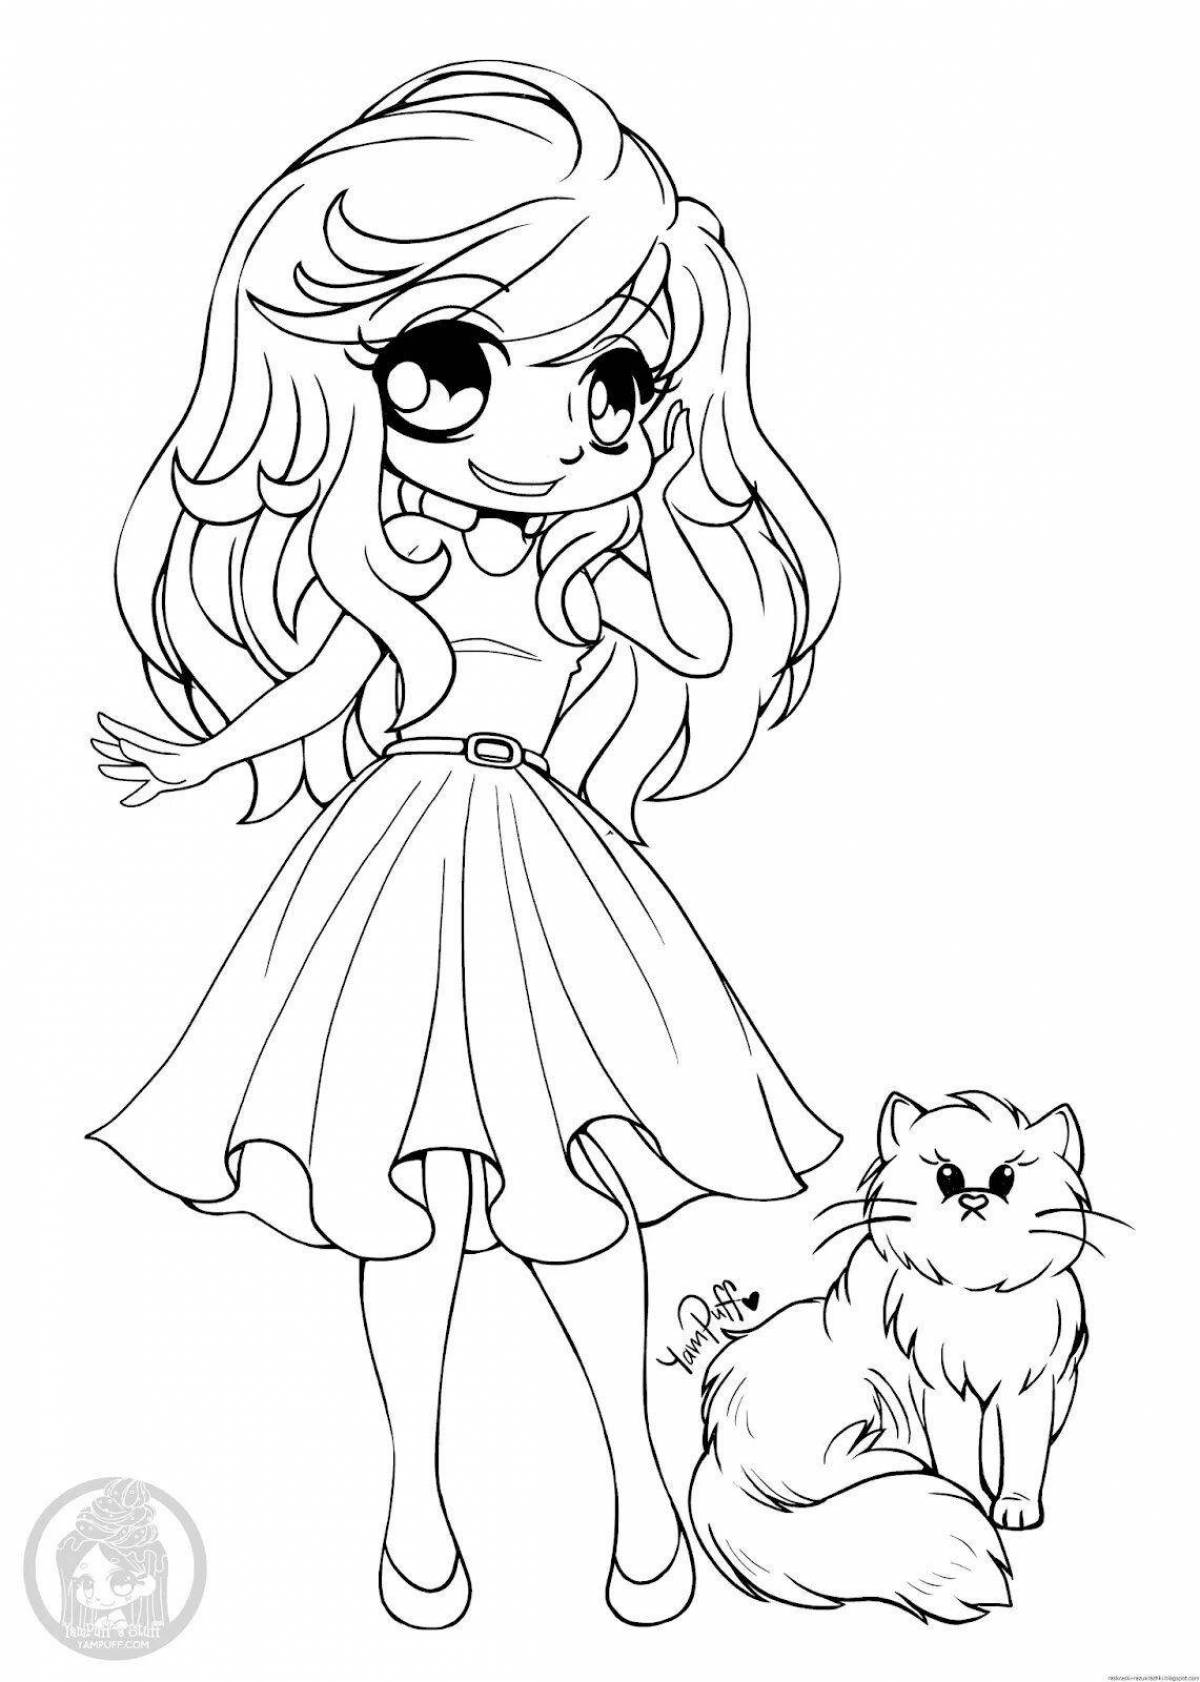 Luminous coloring pages for girls, beautiful and cute